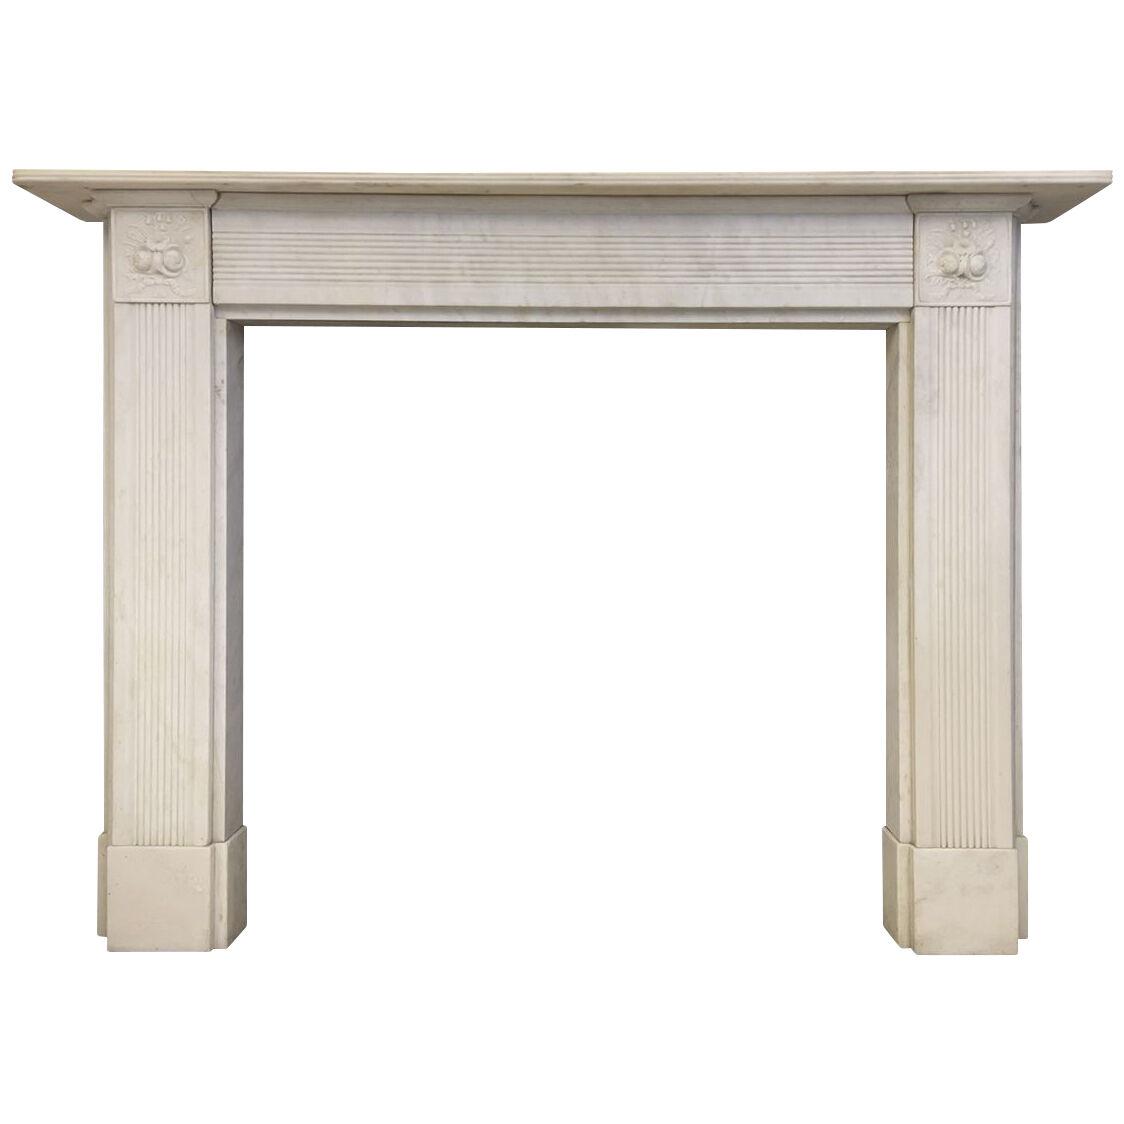 An English Regency Style Reclaimed Marble Fireplace Mantel